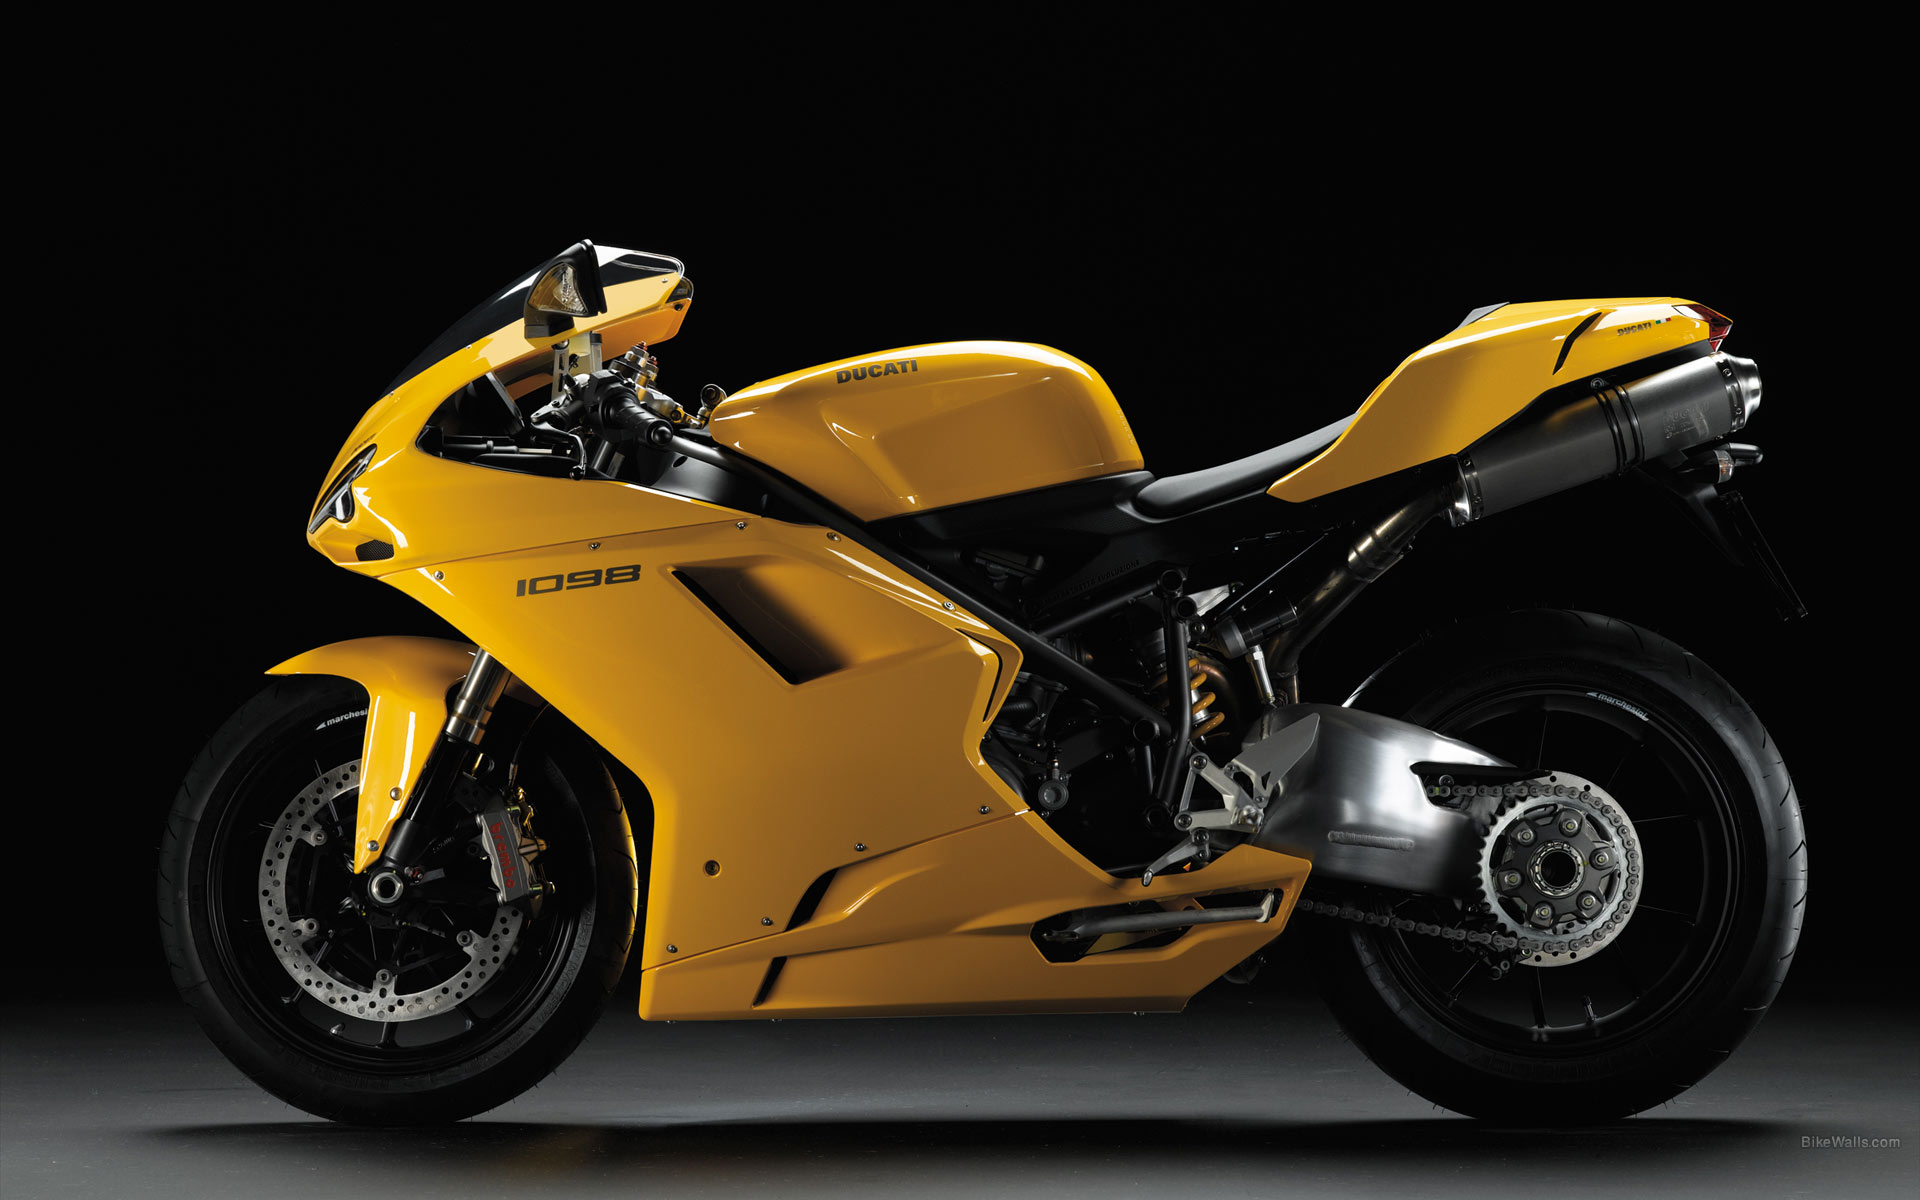 Free download Ducati 1098 17596 Hd Wallpapers in Bikes Imagescicom 1920x1200